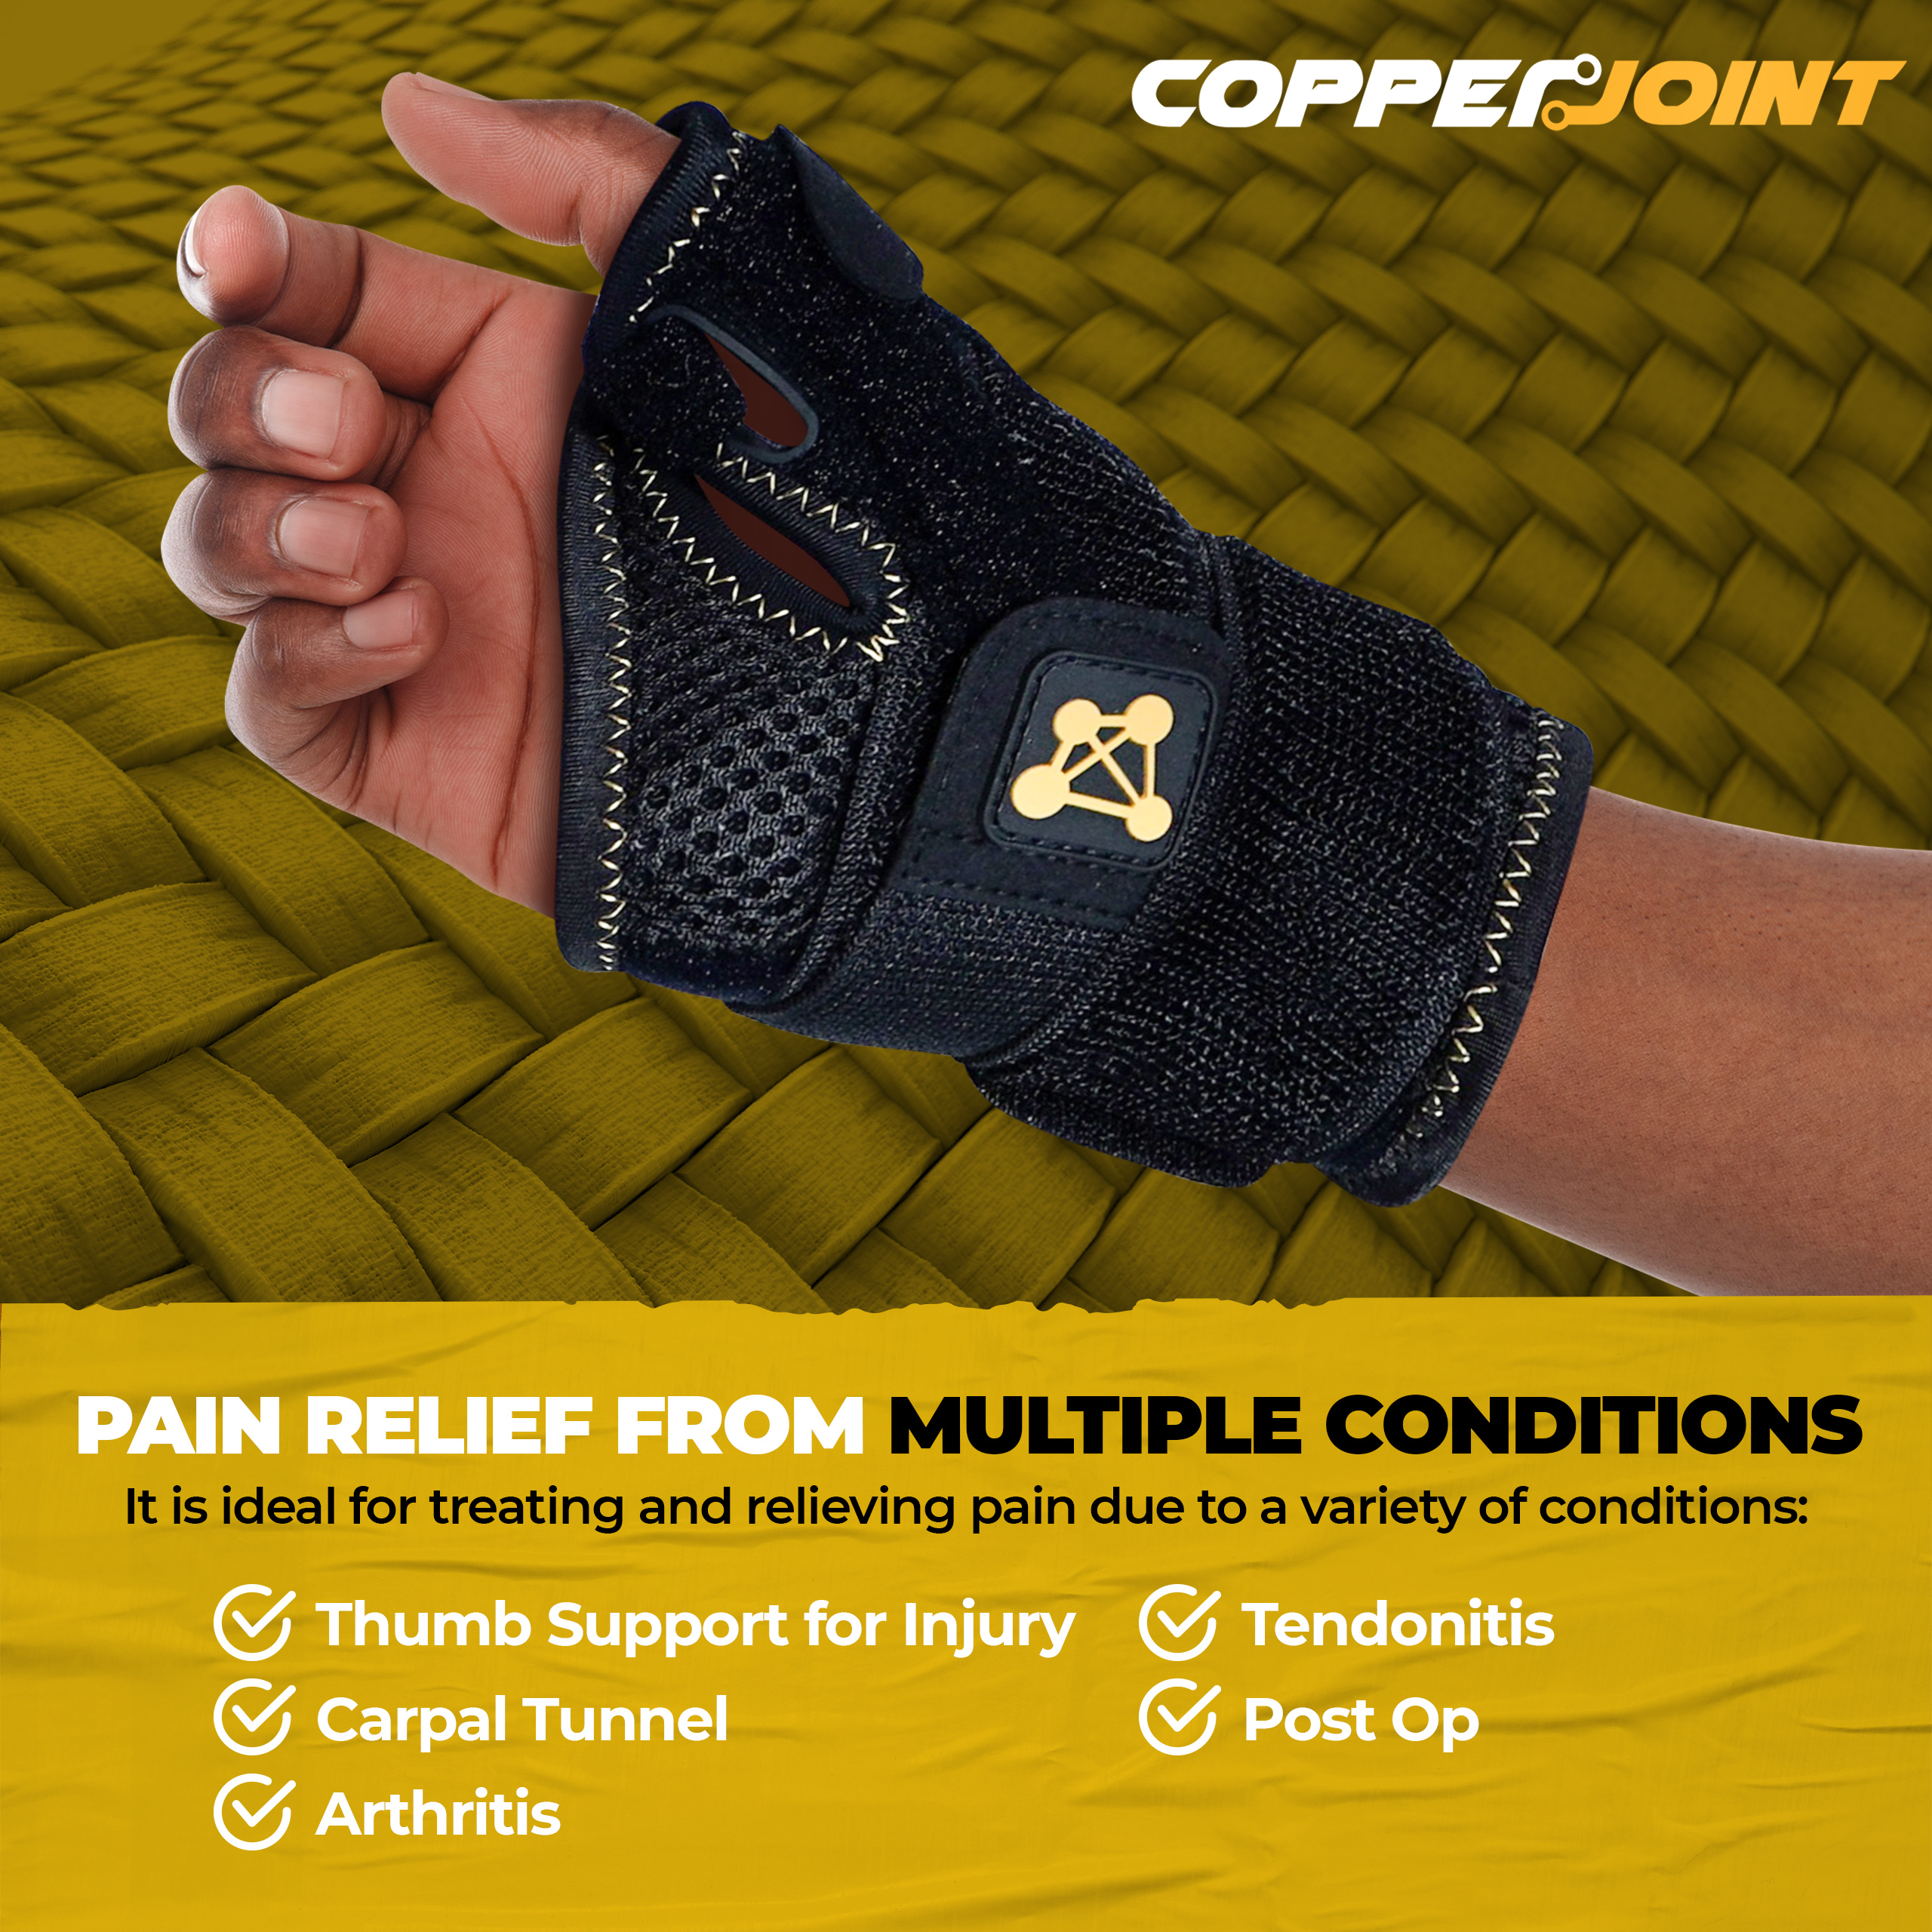 CopperJoint Launches New Thumb Splint on Amazon